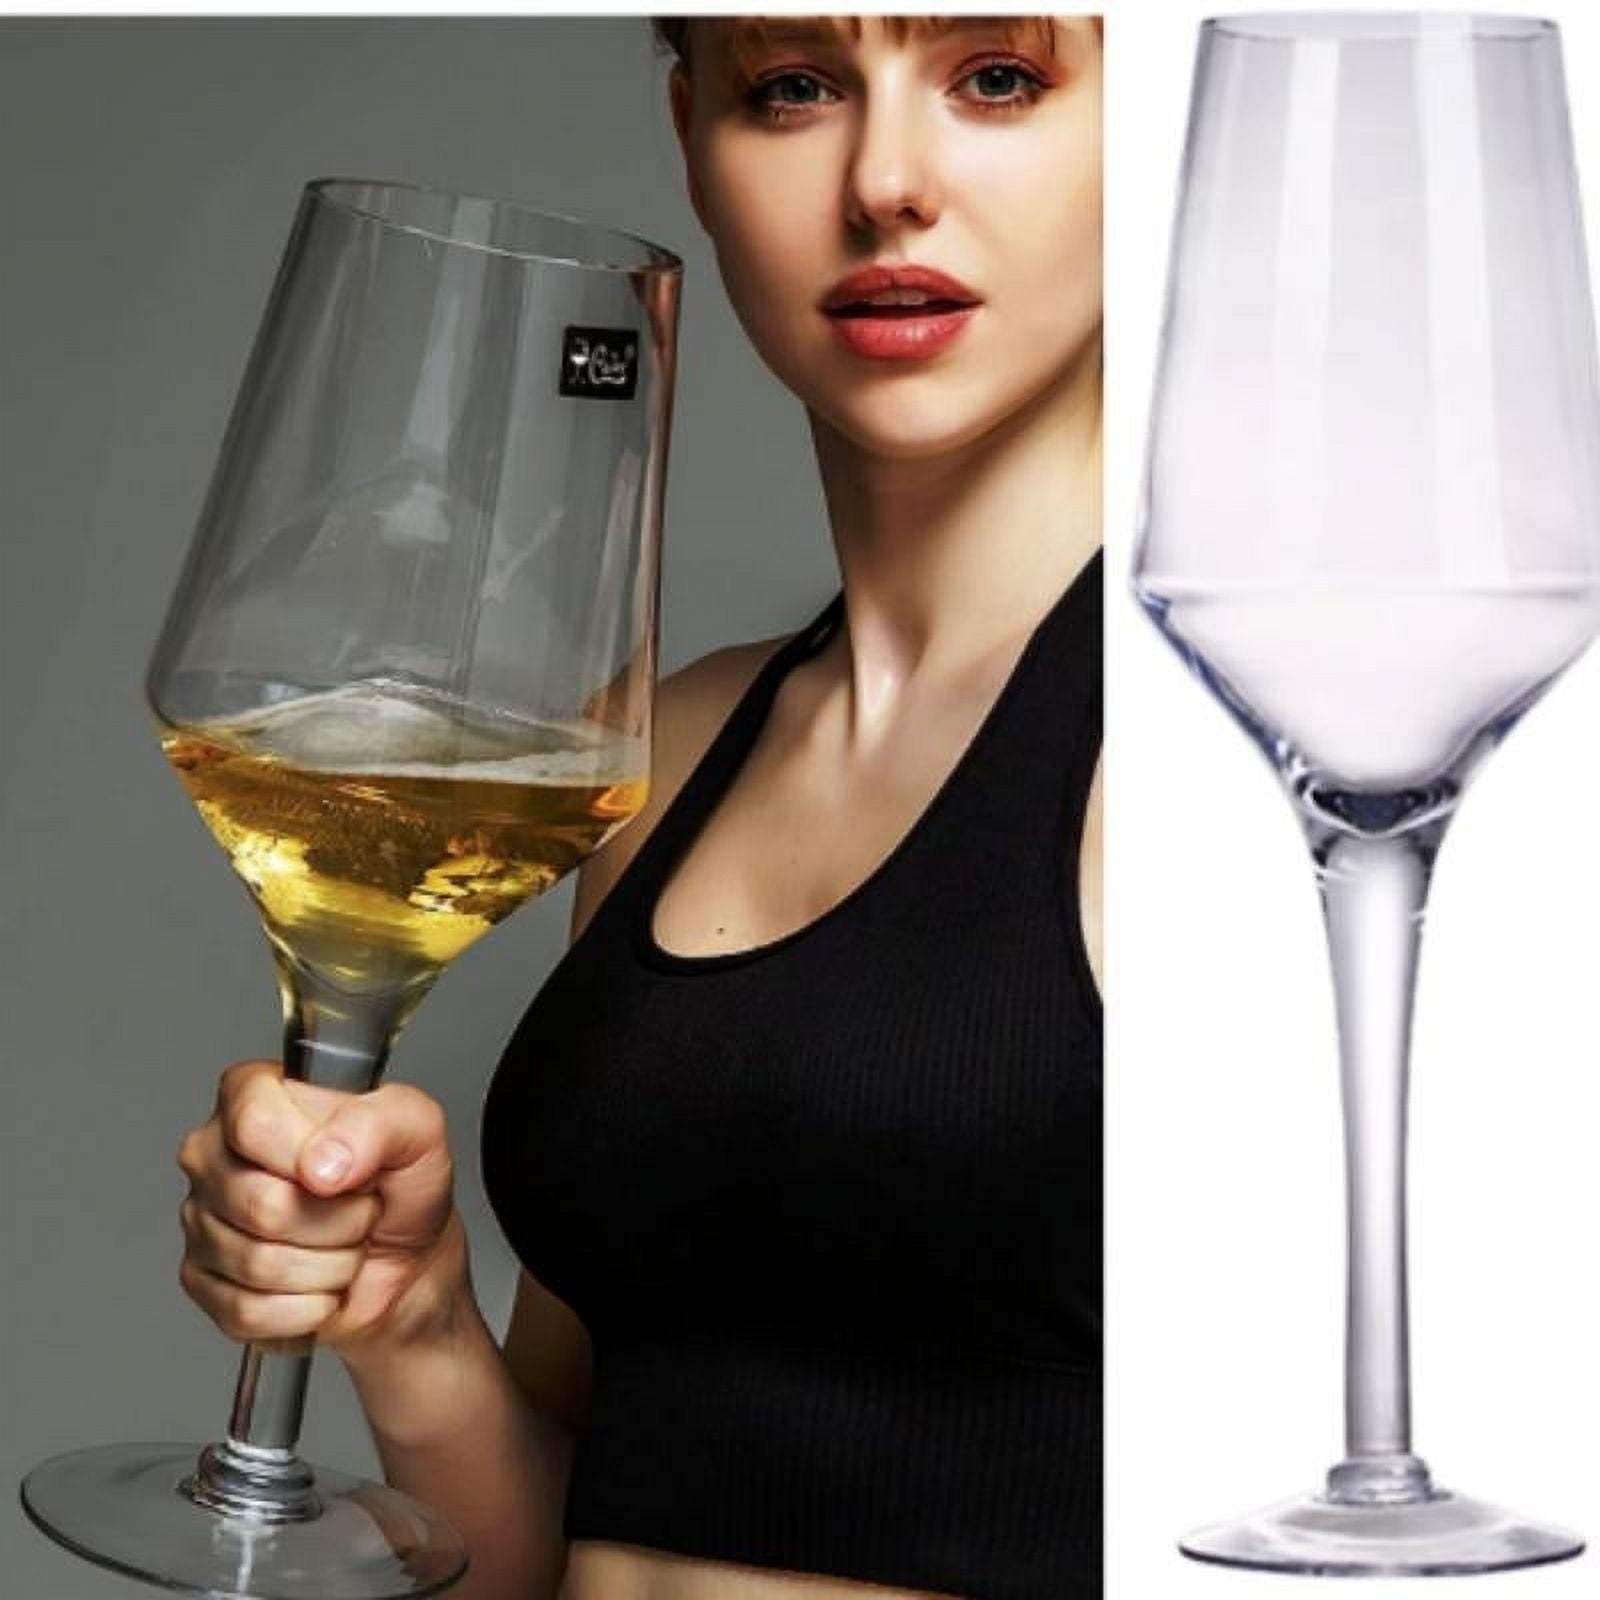 Worlds Largest Giant Wine Glass - Huge 32 Inches, 3.7 Gallons, Mega Pint,  Huge Stemware, Clear Decor…See more Worlds Largest Giant Wine Glass - Huge